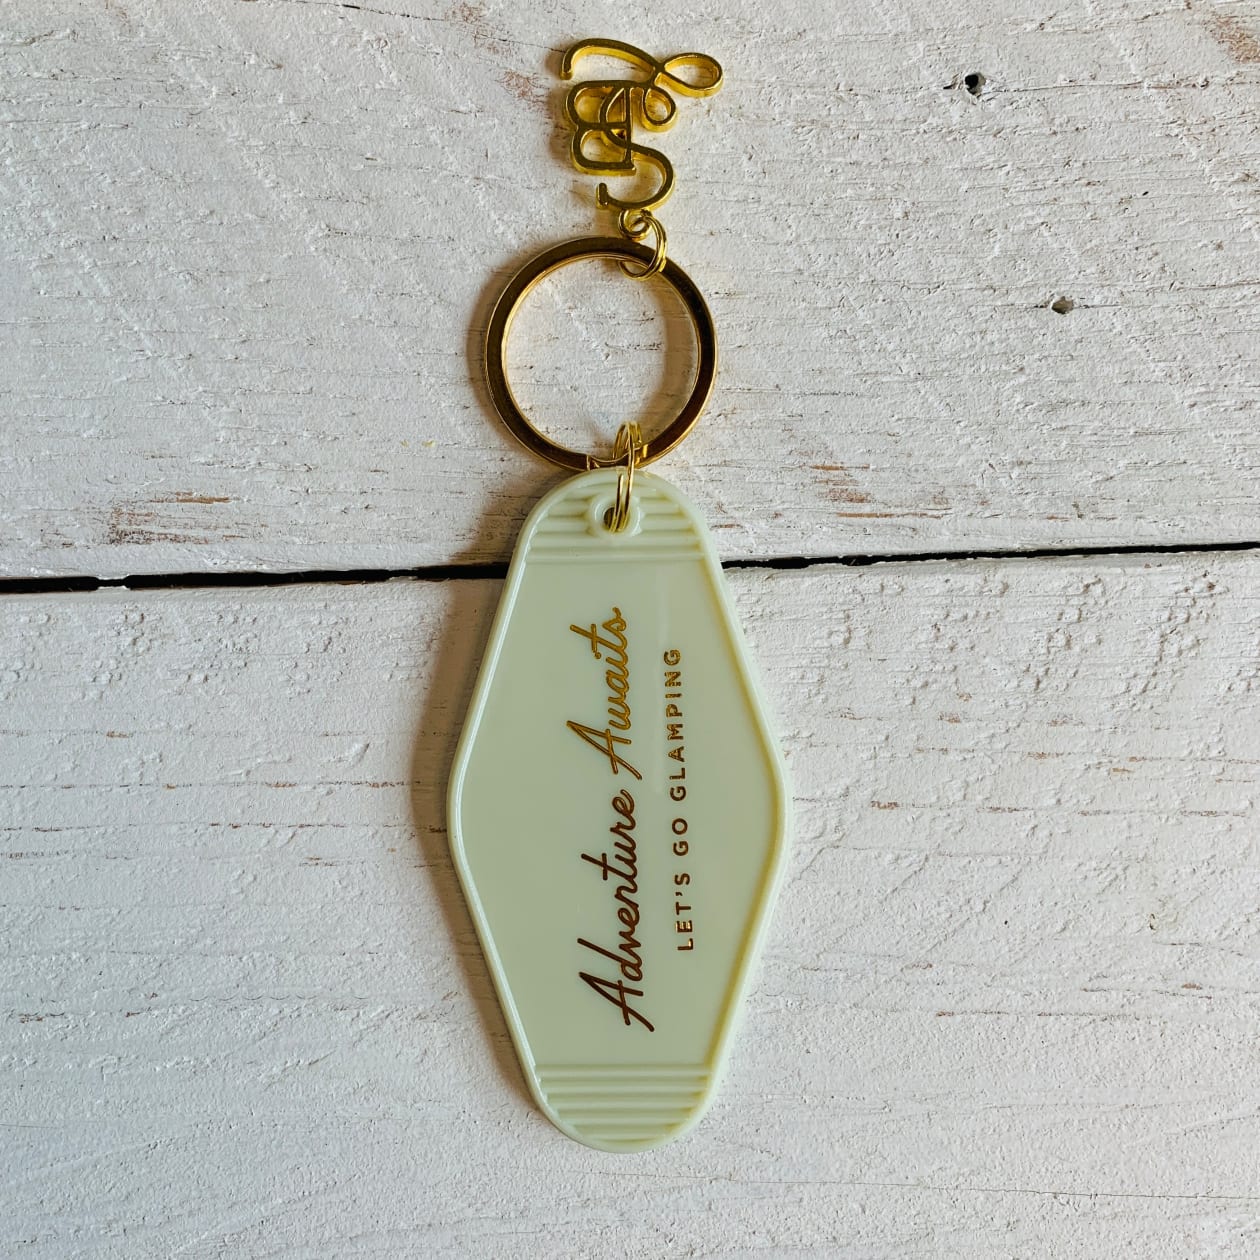 Adventure Awaits Let's Go Glamping Motel Style Keychain in Light Green with Gold Hardware